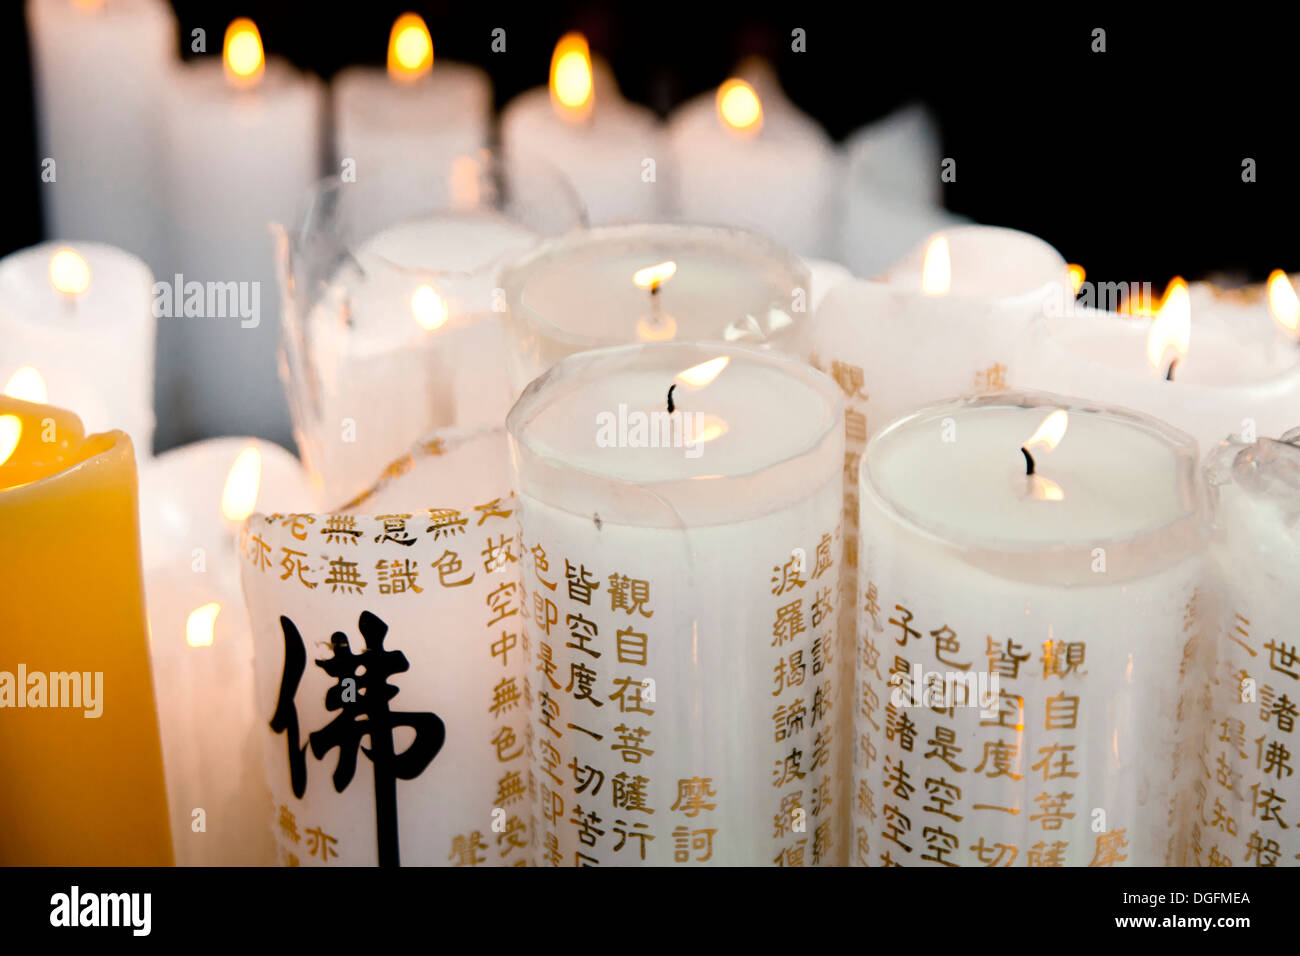 Candles in a temple. The text on the candles is The Heart Of Prajna Paramita Sutra. Stock Photo